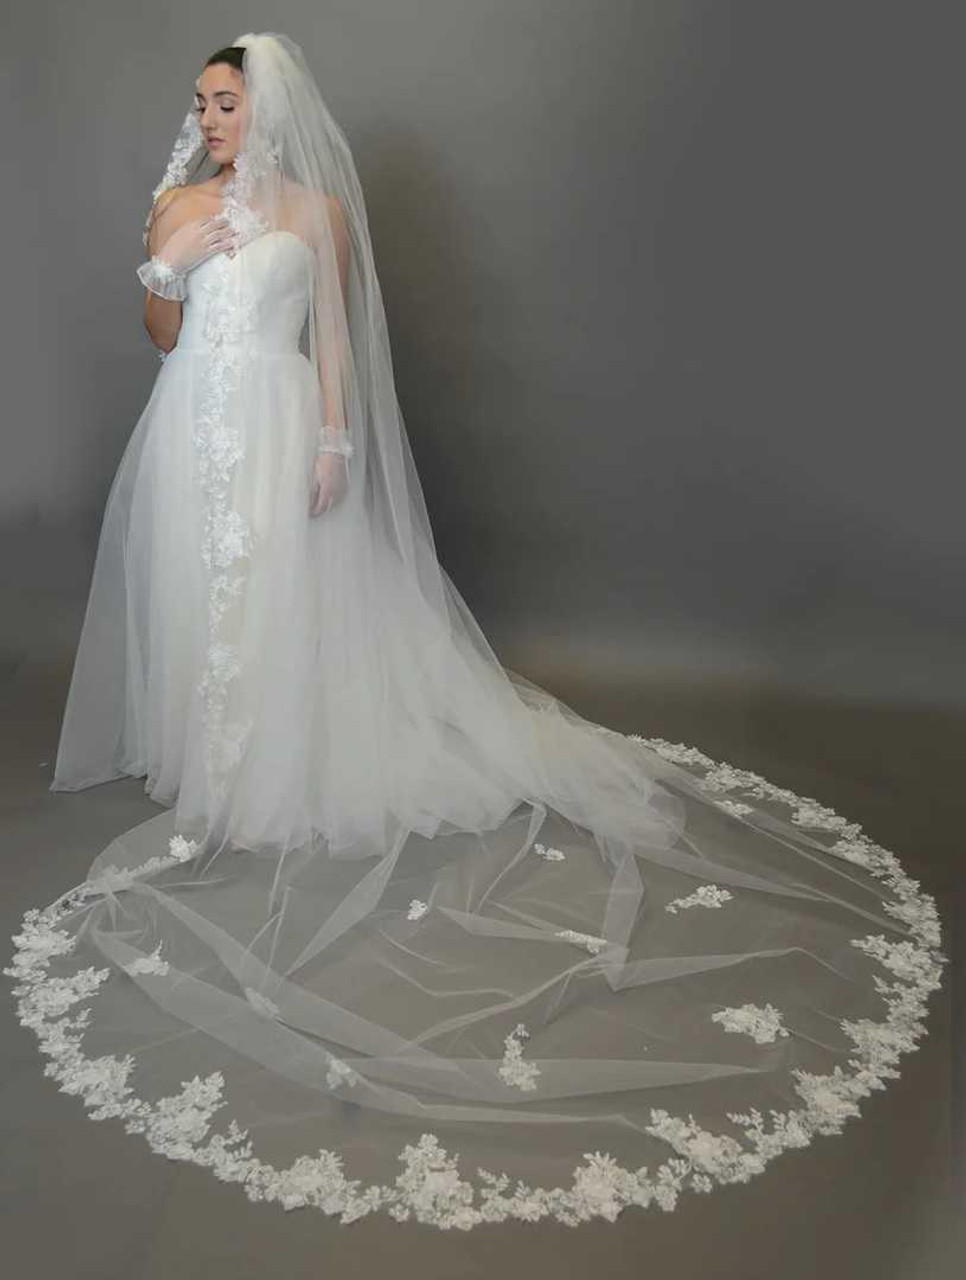 https://cdn11.bigcommerce.com/s-zb3qt33o/images/stencil/1280x1280/products/19841/60177/Royal-Cathedral-Wedding-Veil-With-Romantic-Floral-Lace-Elena-E1311_54791__97029.1689197009.jpg?c=2